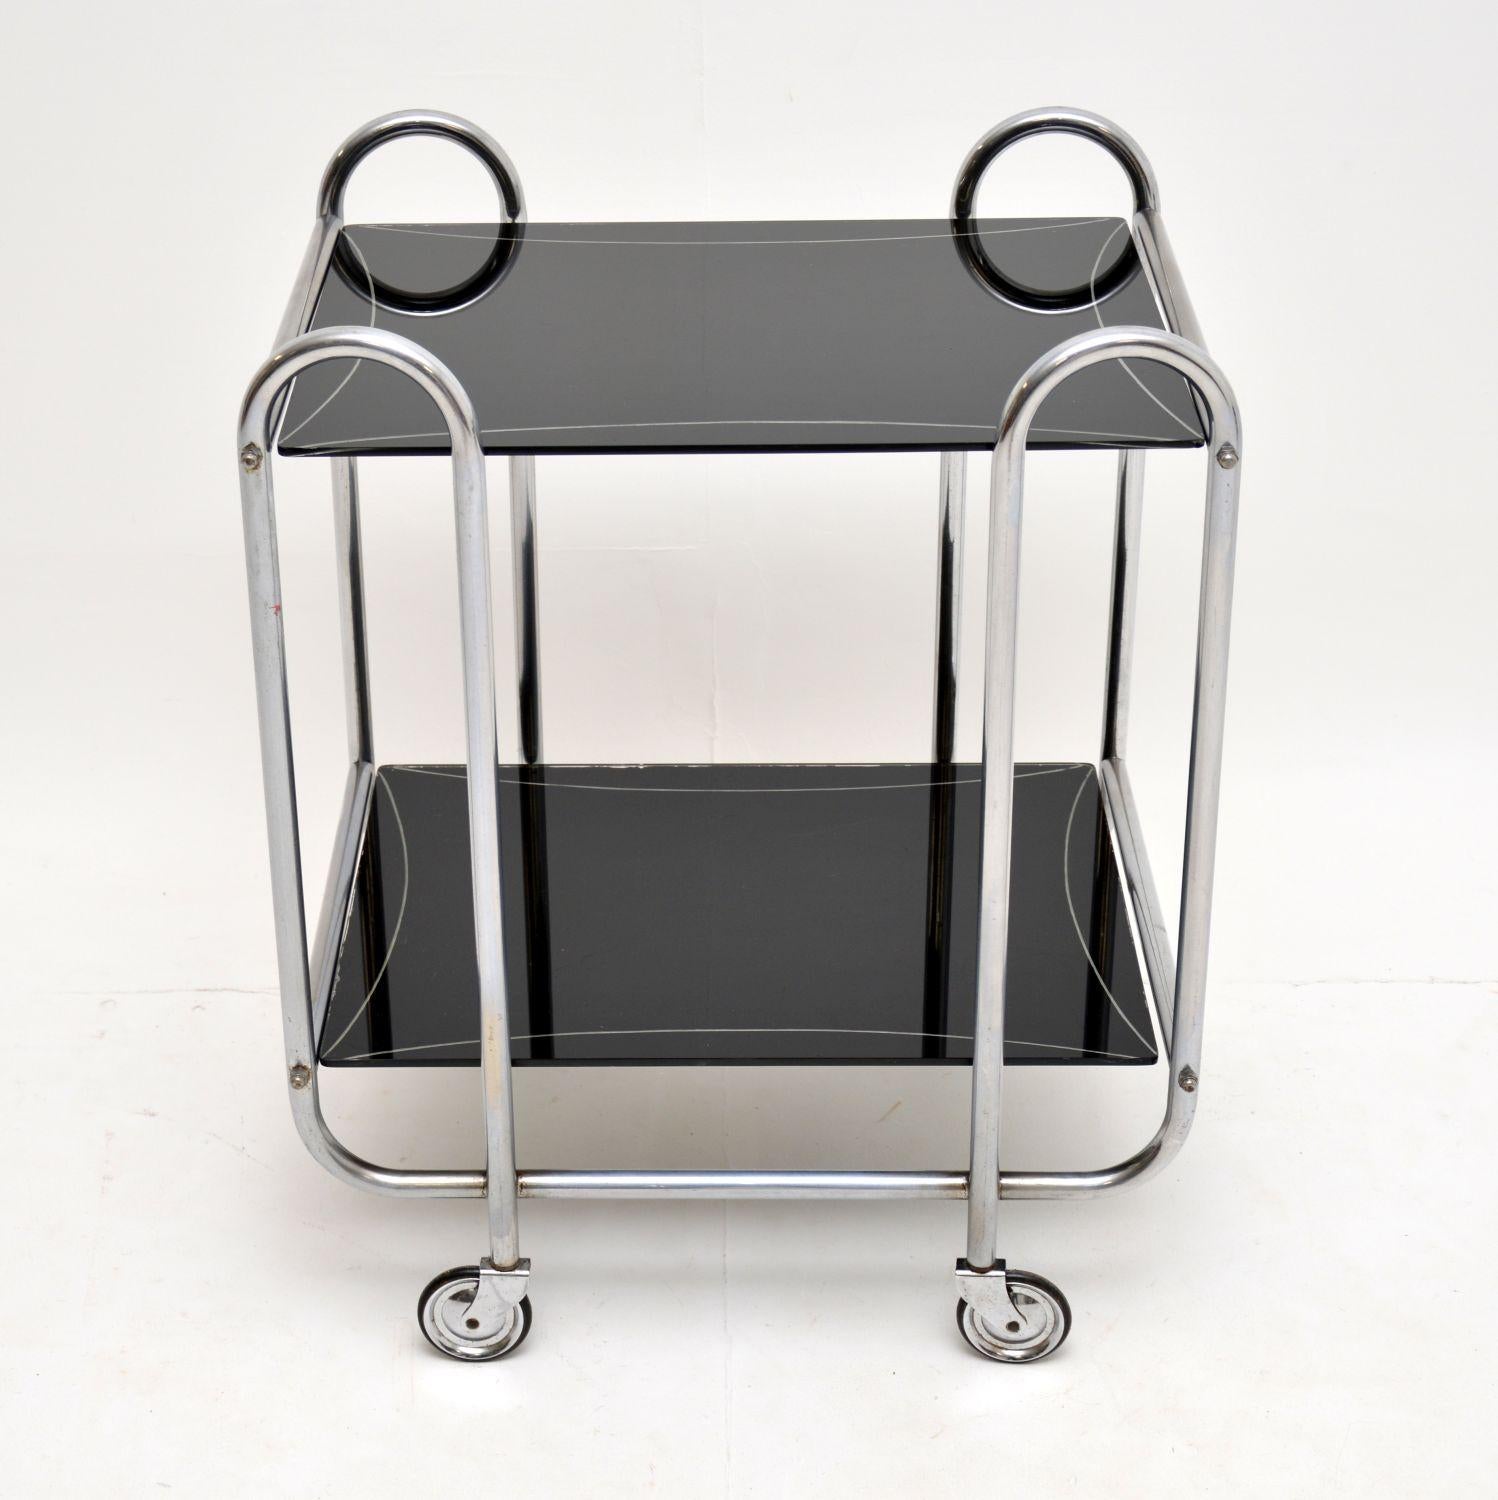 A stunning vintage Art Deco period drinks trolley, dating from the 1930s-1950s. This is beautifully made from tubular steel, and has removable black glass shelves.

The condition is excellent for its age, with no major damage and only some minor